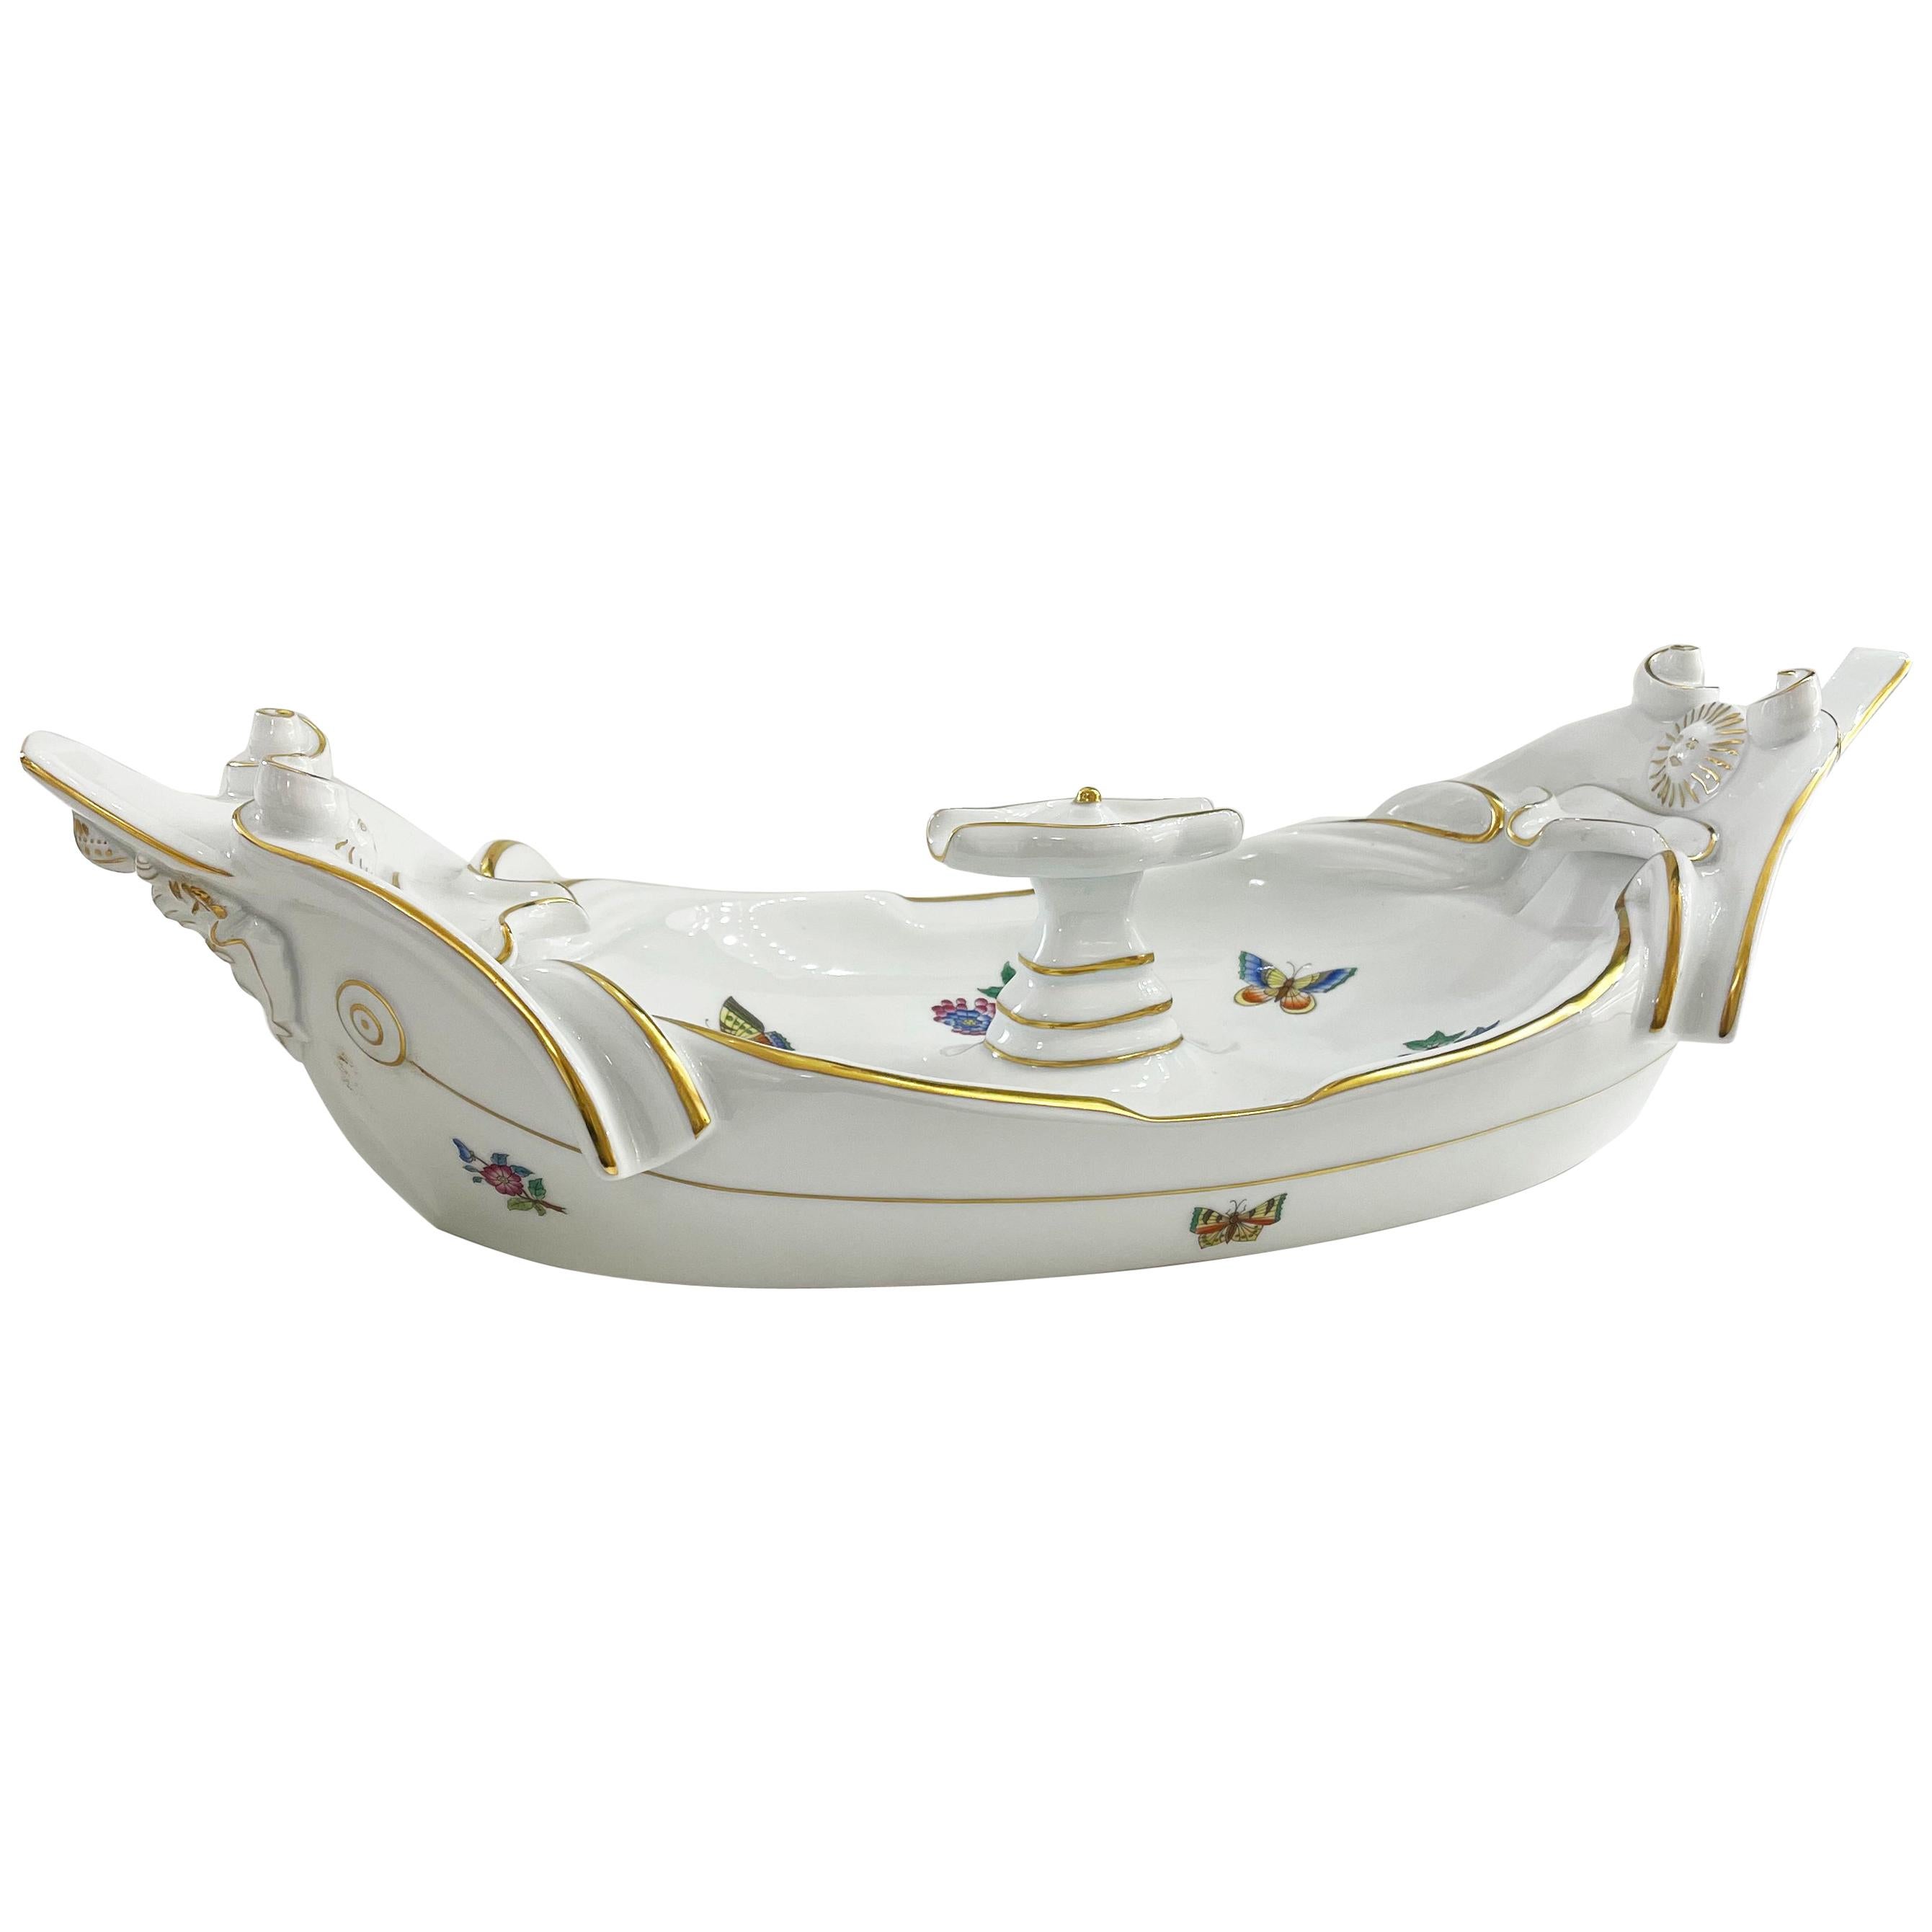 "Barcaccia" Fountain Herend Porcelain Centerpiece Exclusive for SERRA For Sale